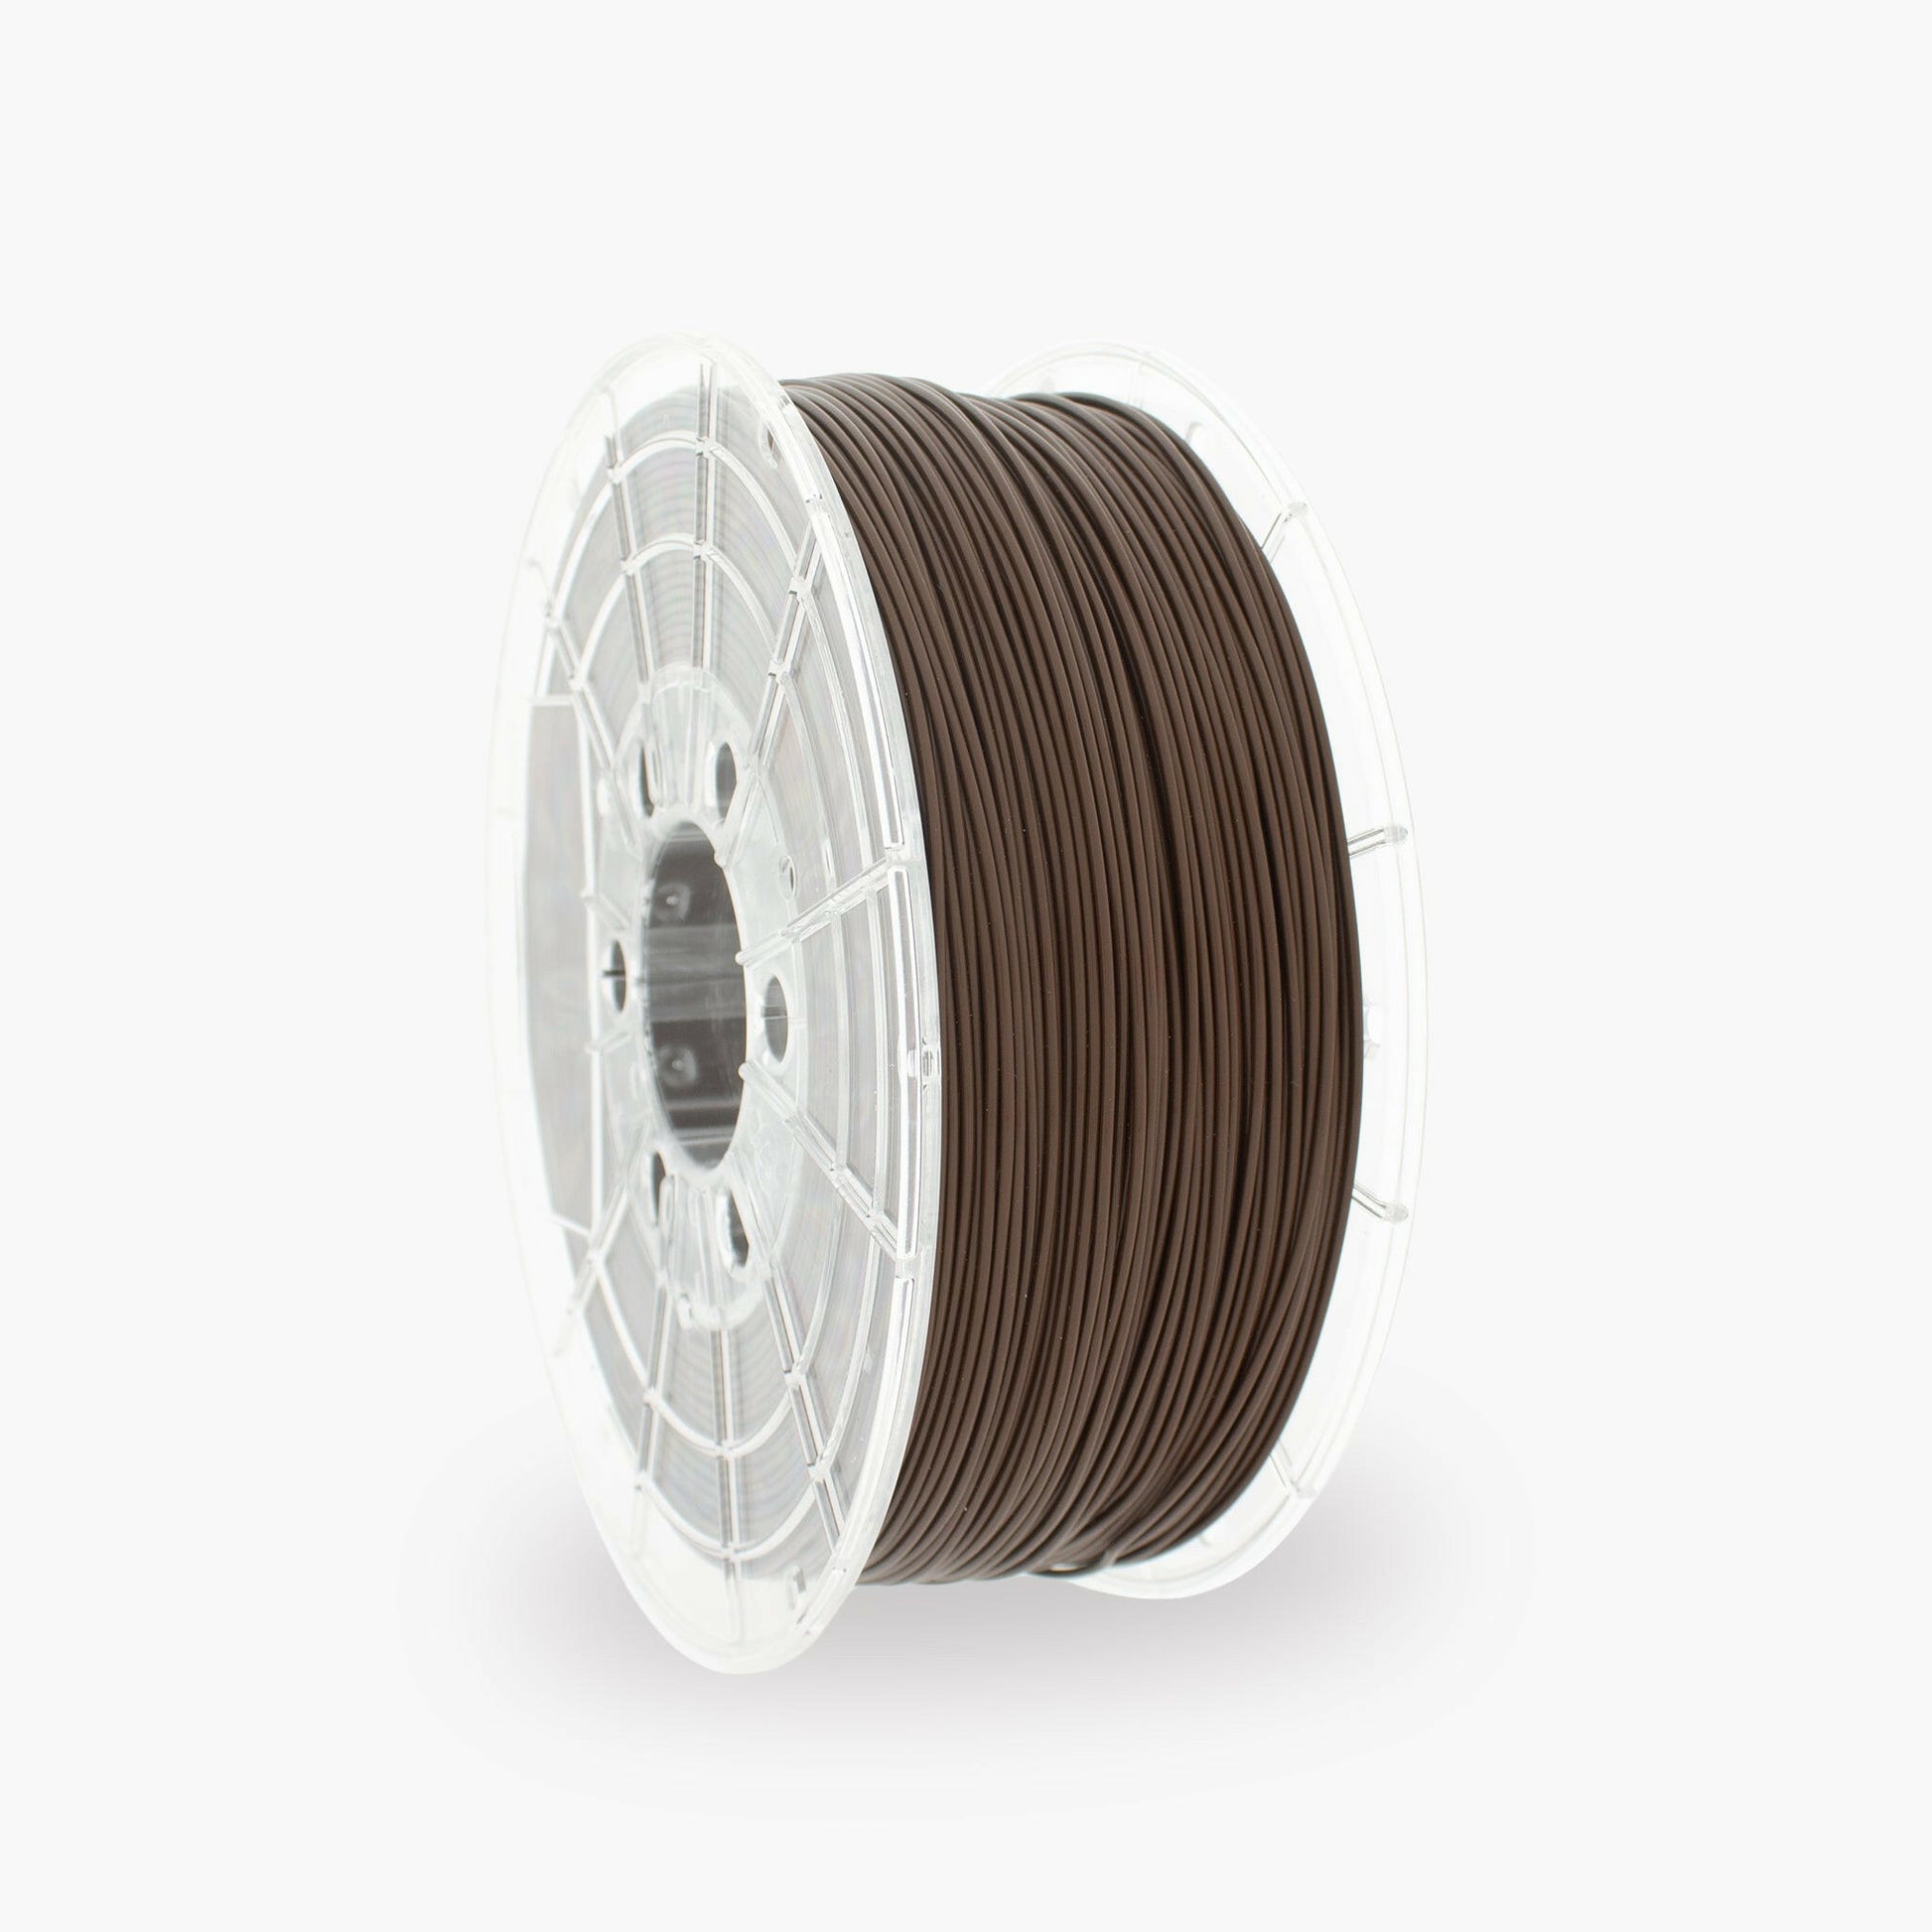 Mahogany Brown PLA 3D Printer Filament with a diameter of 1.75mm on a 1KG Spool.